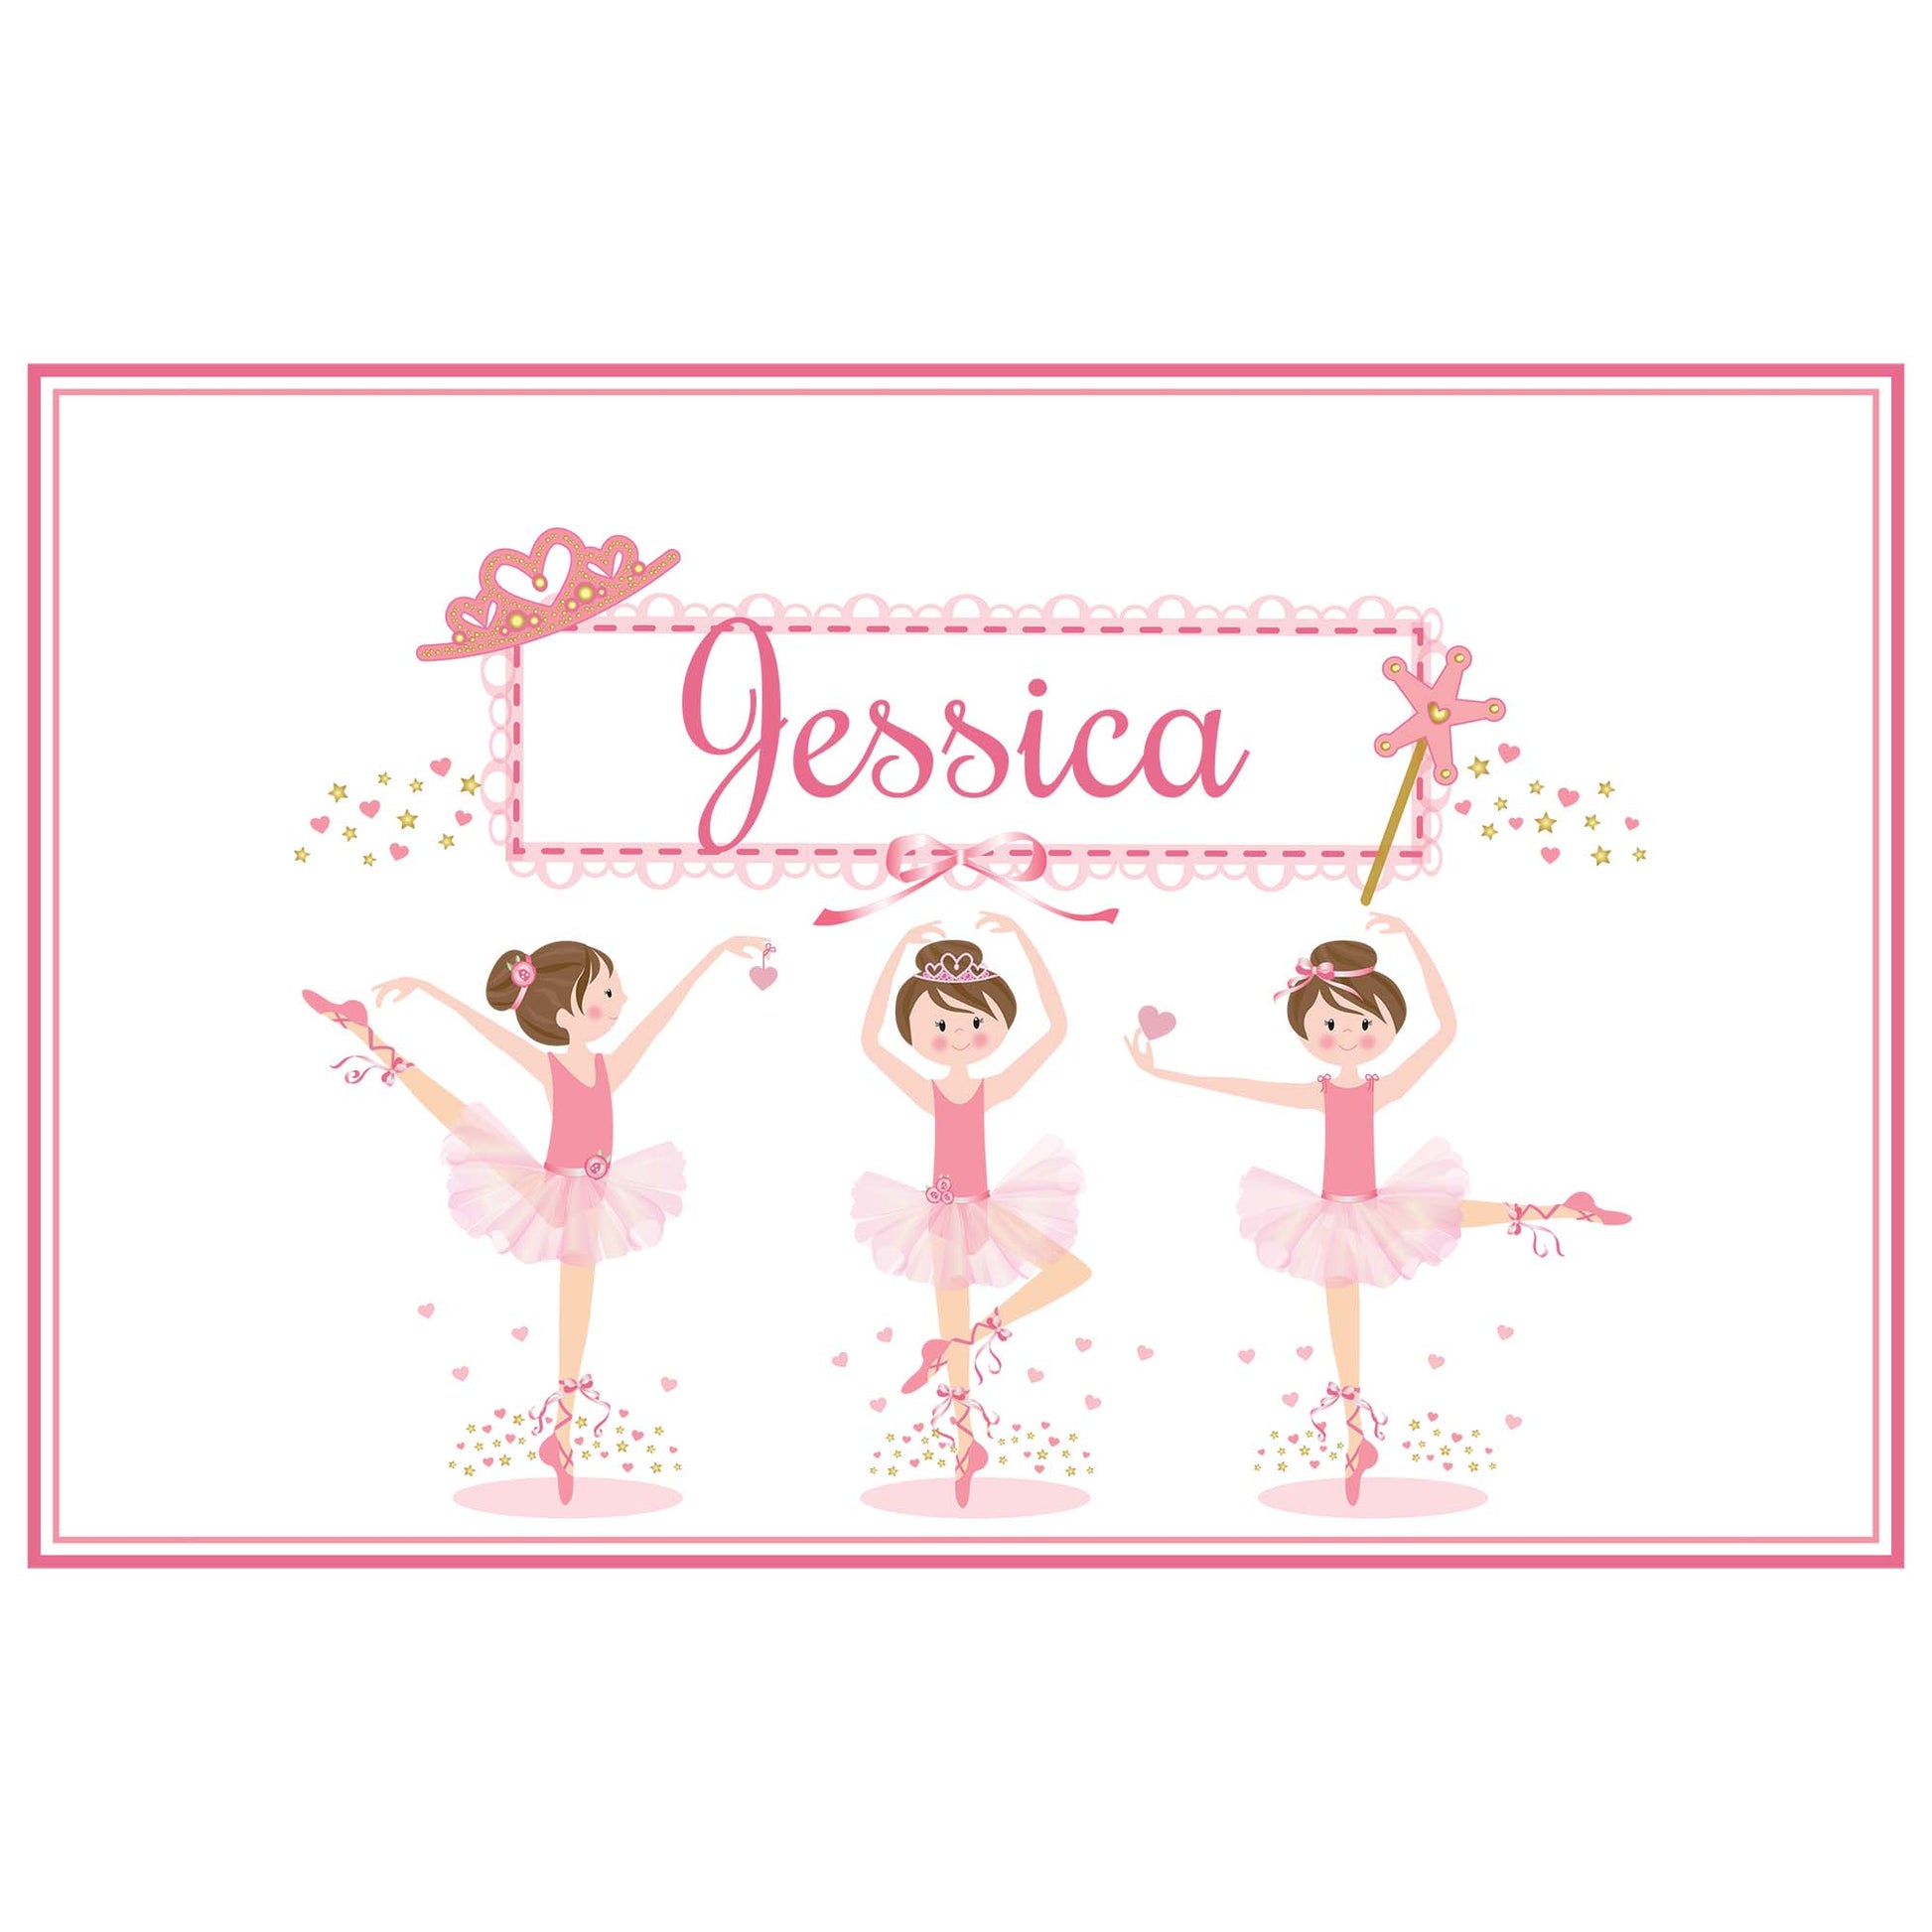 Personalized Placemat with Ballerina Brunette design